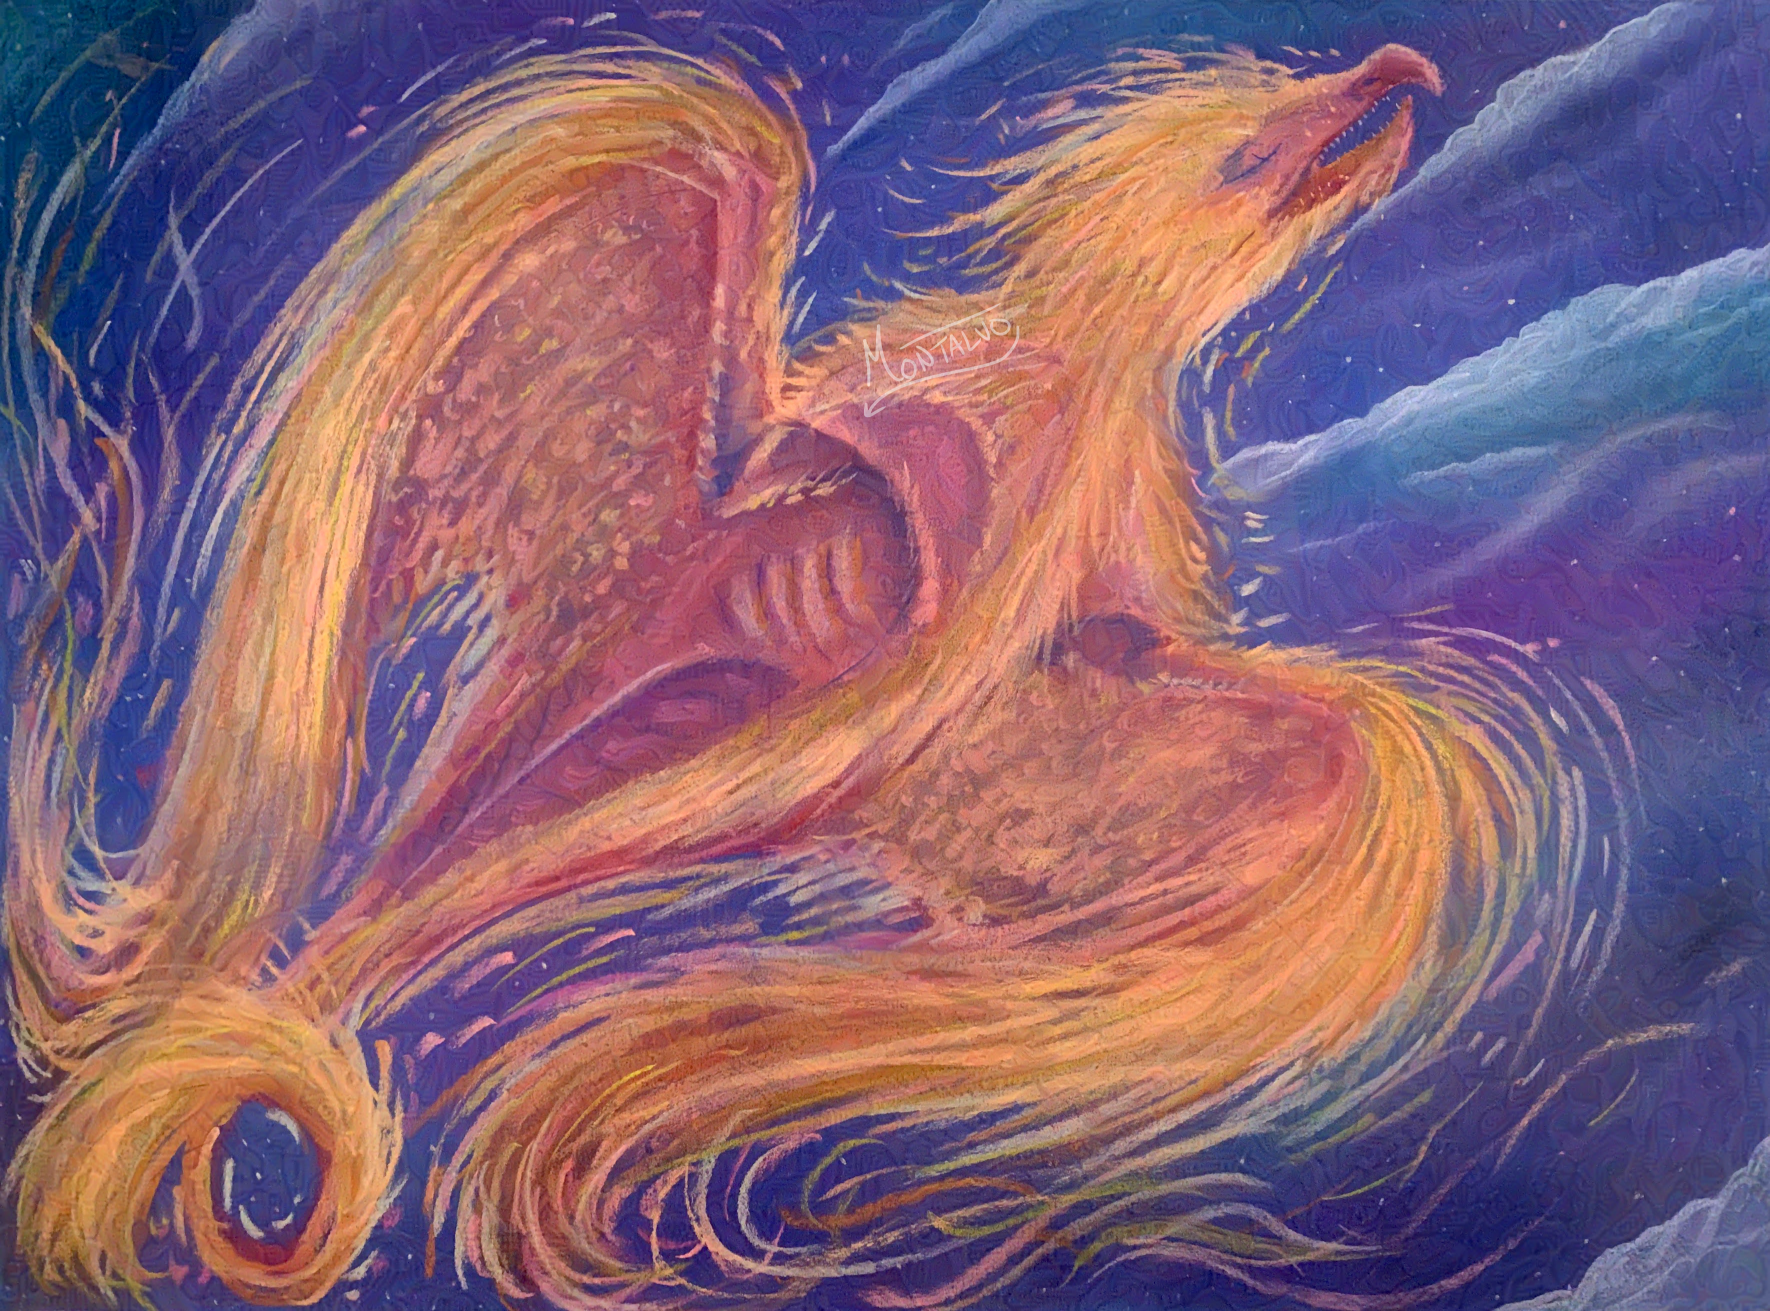 A pastel illustration of a bird-like dragon with fiery wings.'